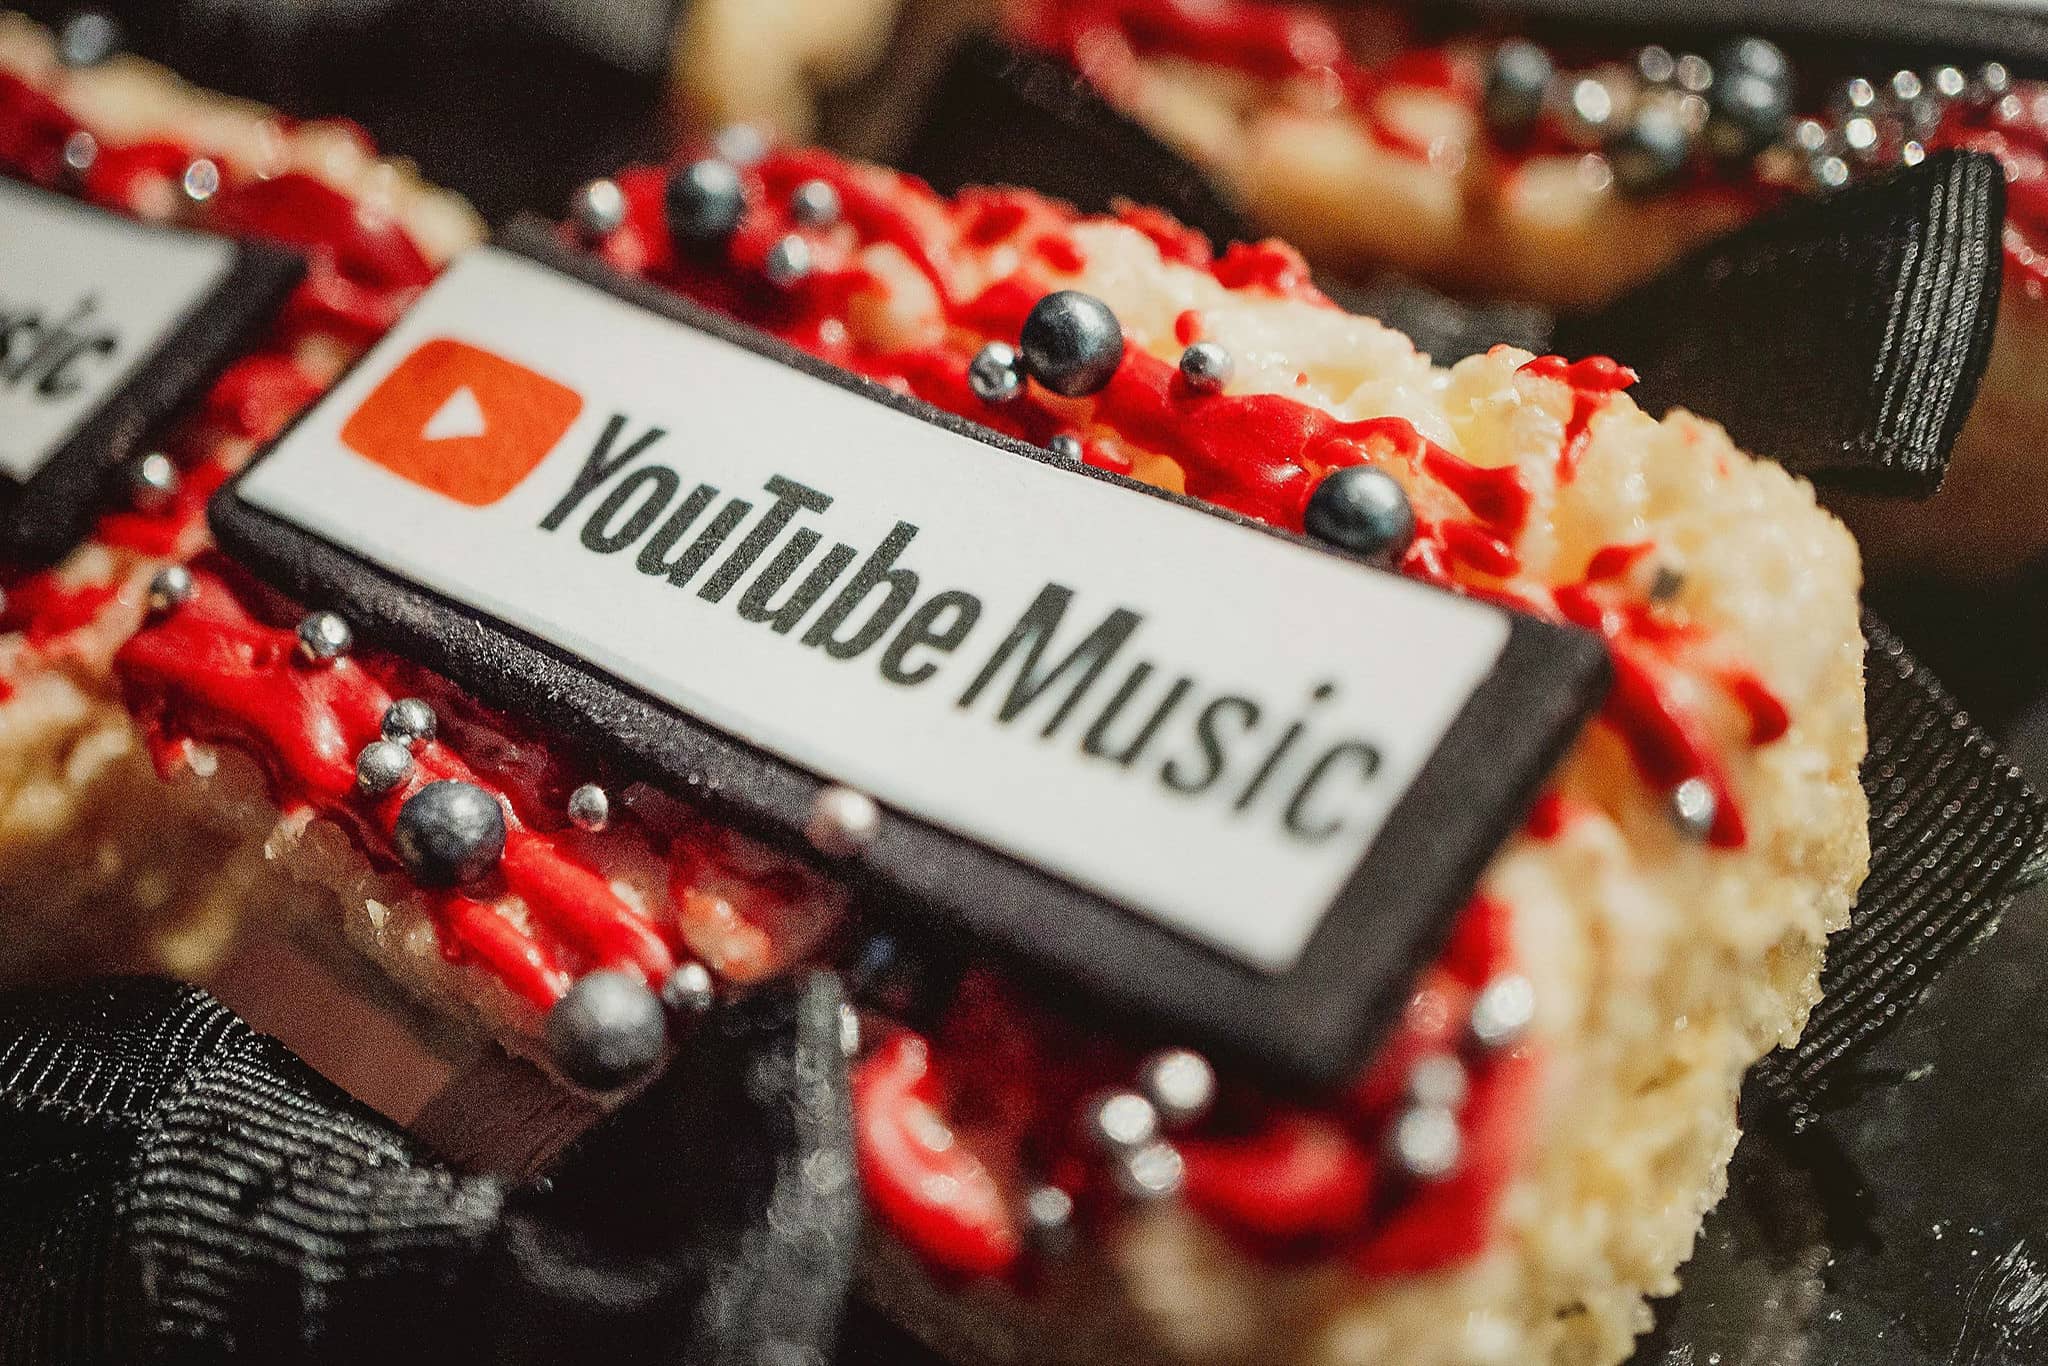 Custom desserts | Youtube conferences and meetings